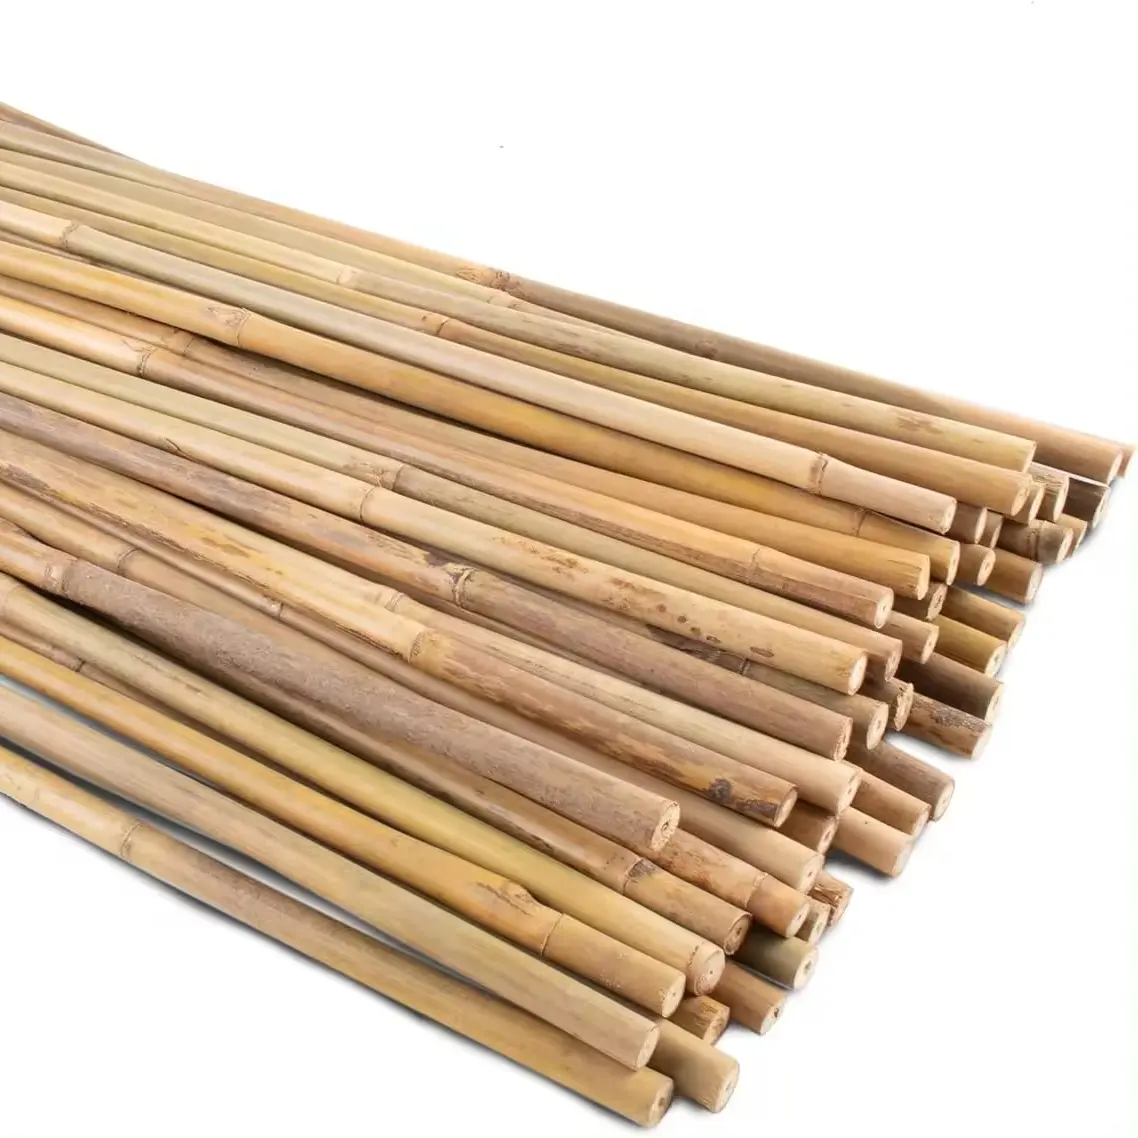 Green Bamboo Plant Canes Whole Manufacturers' Bamboo Cane or Pole High Quality Product